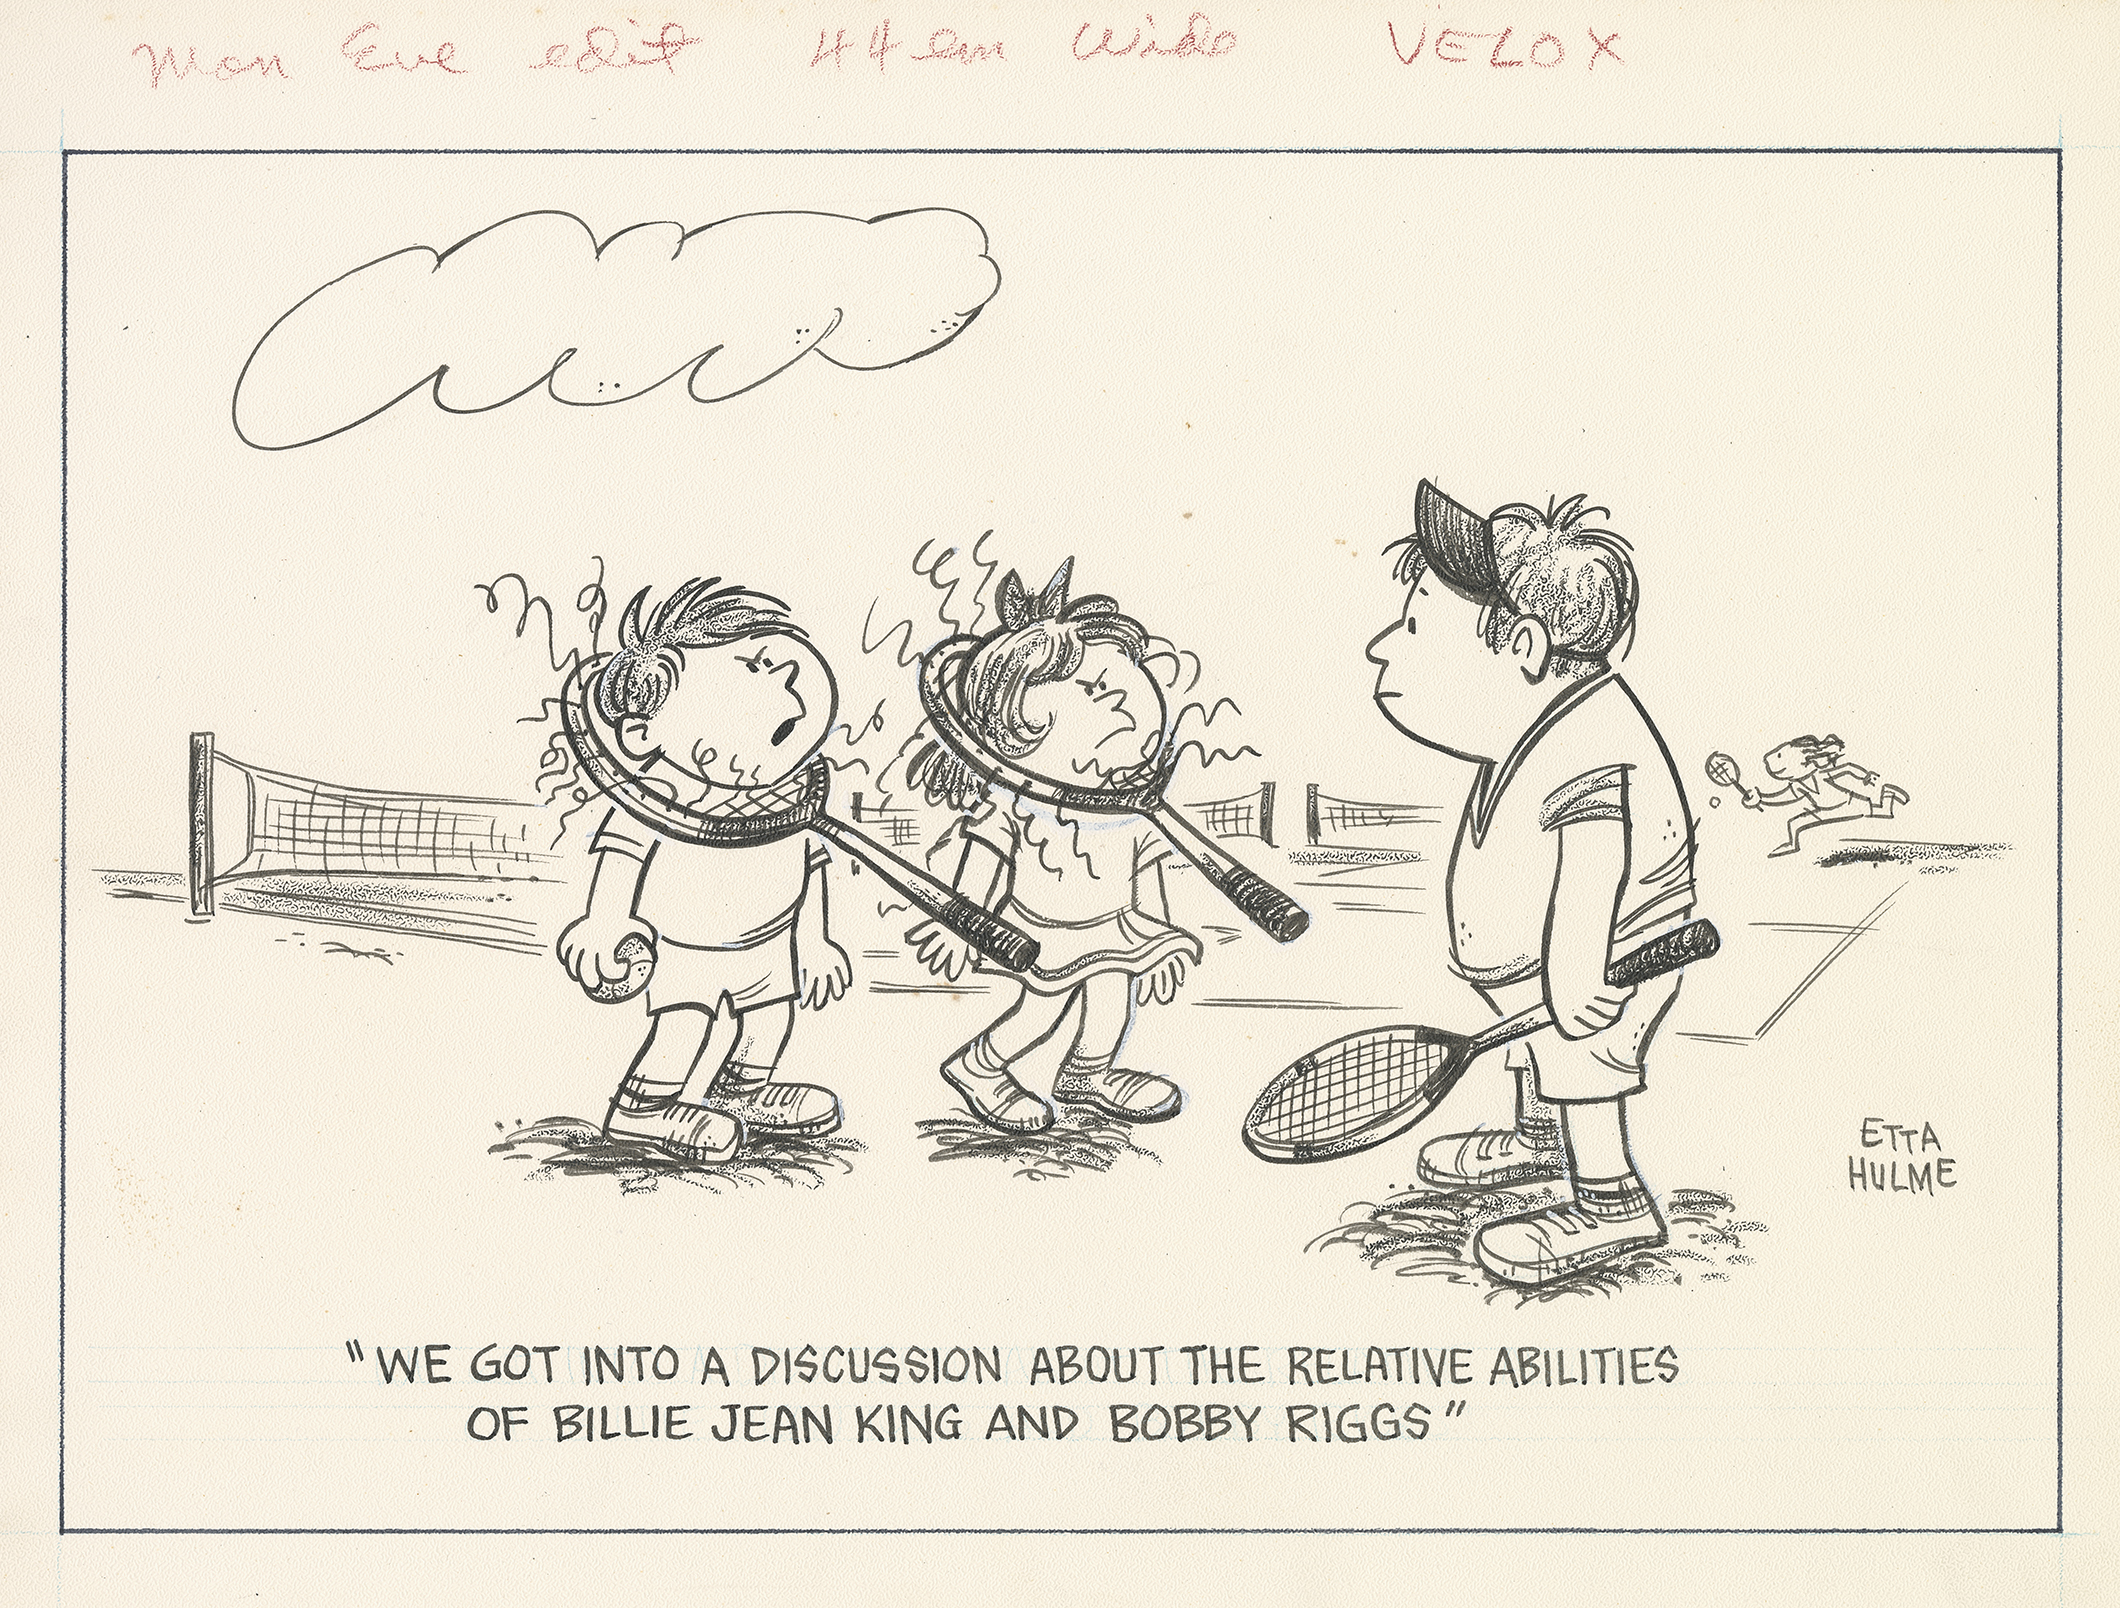 We got into a discussion about the relative abilities of Billie Jean King  and Bobby Riggs | Etta Hulme Cartoon Archive